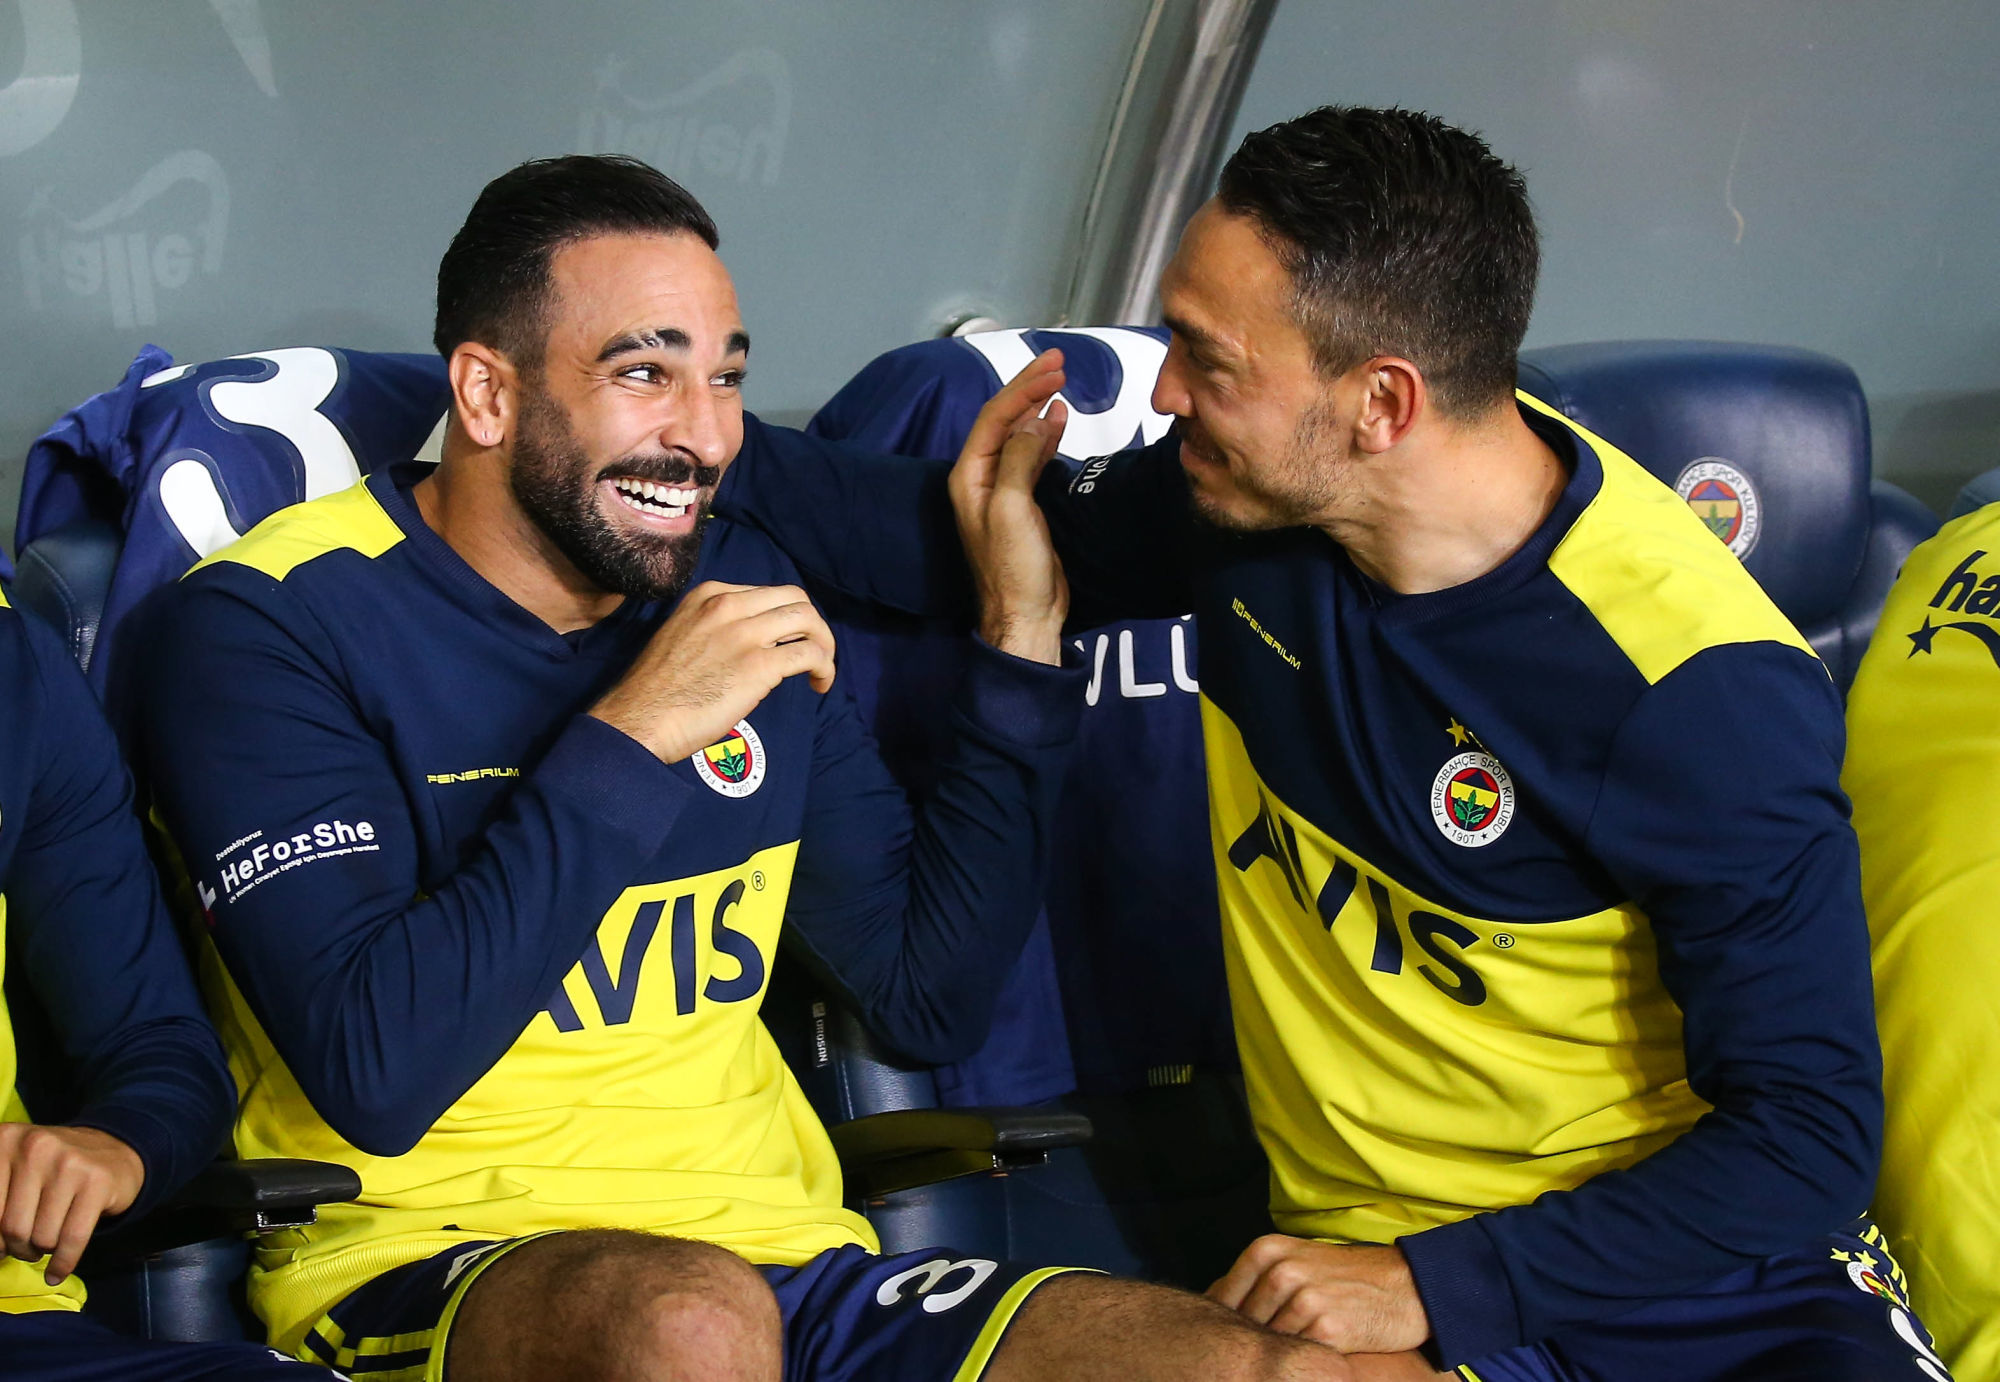 Adil Rami and Mevlut Erdinc (R) of Fenerbahce during the Turkish Super League football match between Fenerbahce and Antalyaspor at Ulker Stadium in Istanbul , Turkey on October 04 , 2019. 

Photo by Icon Sport - Adil RAMI - Mevlut ERDINC - Kadir Has Stadium - Kayseri (Turquie)